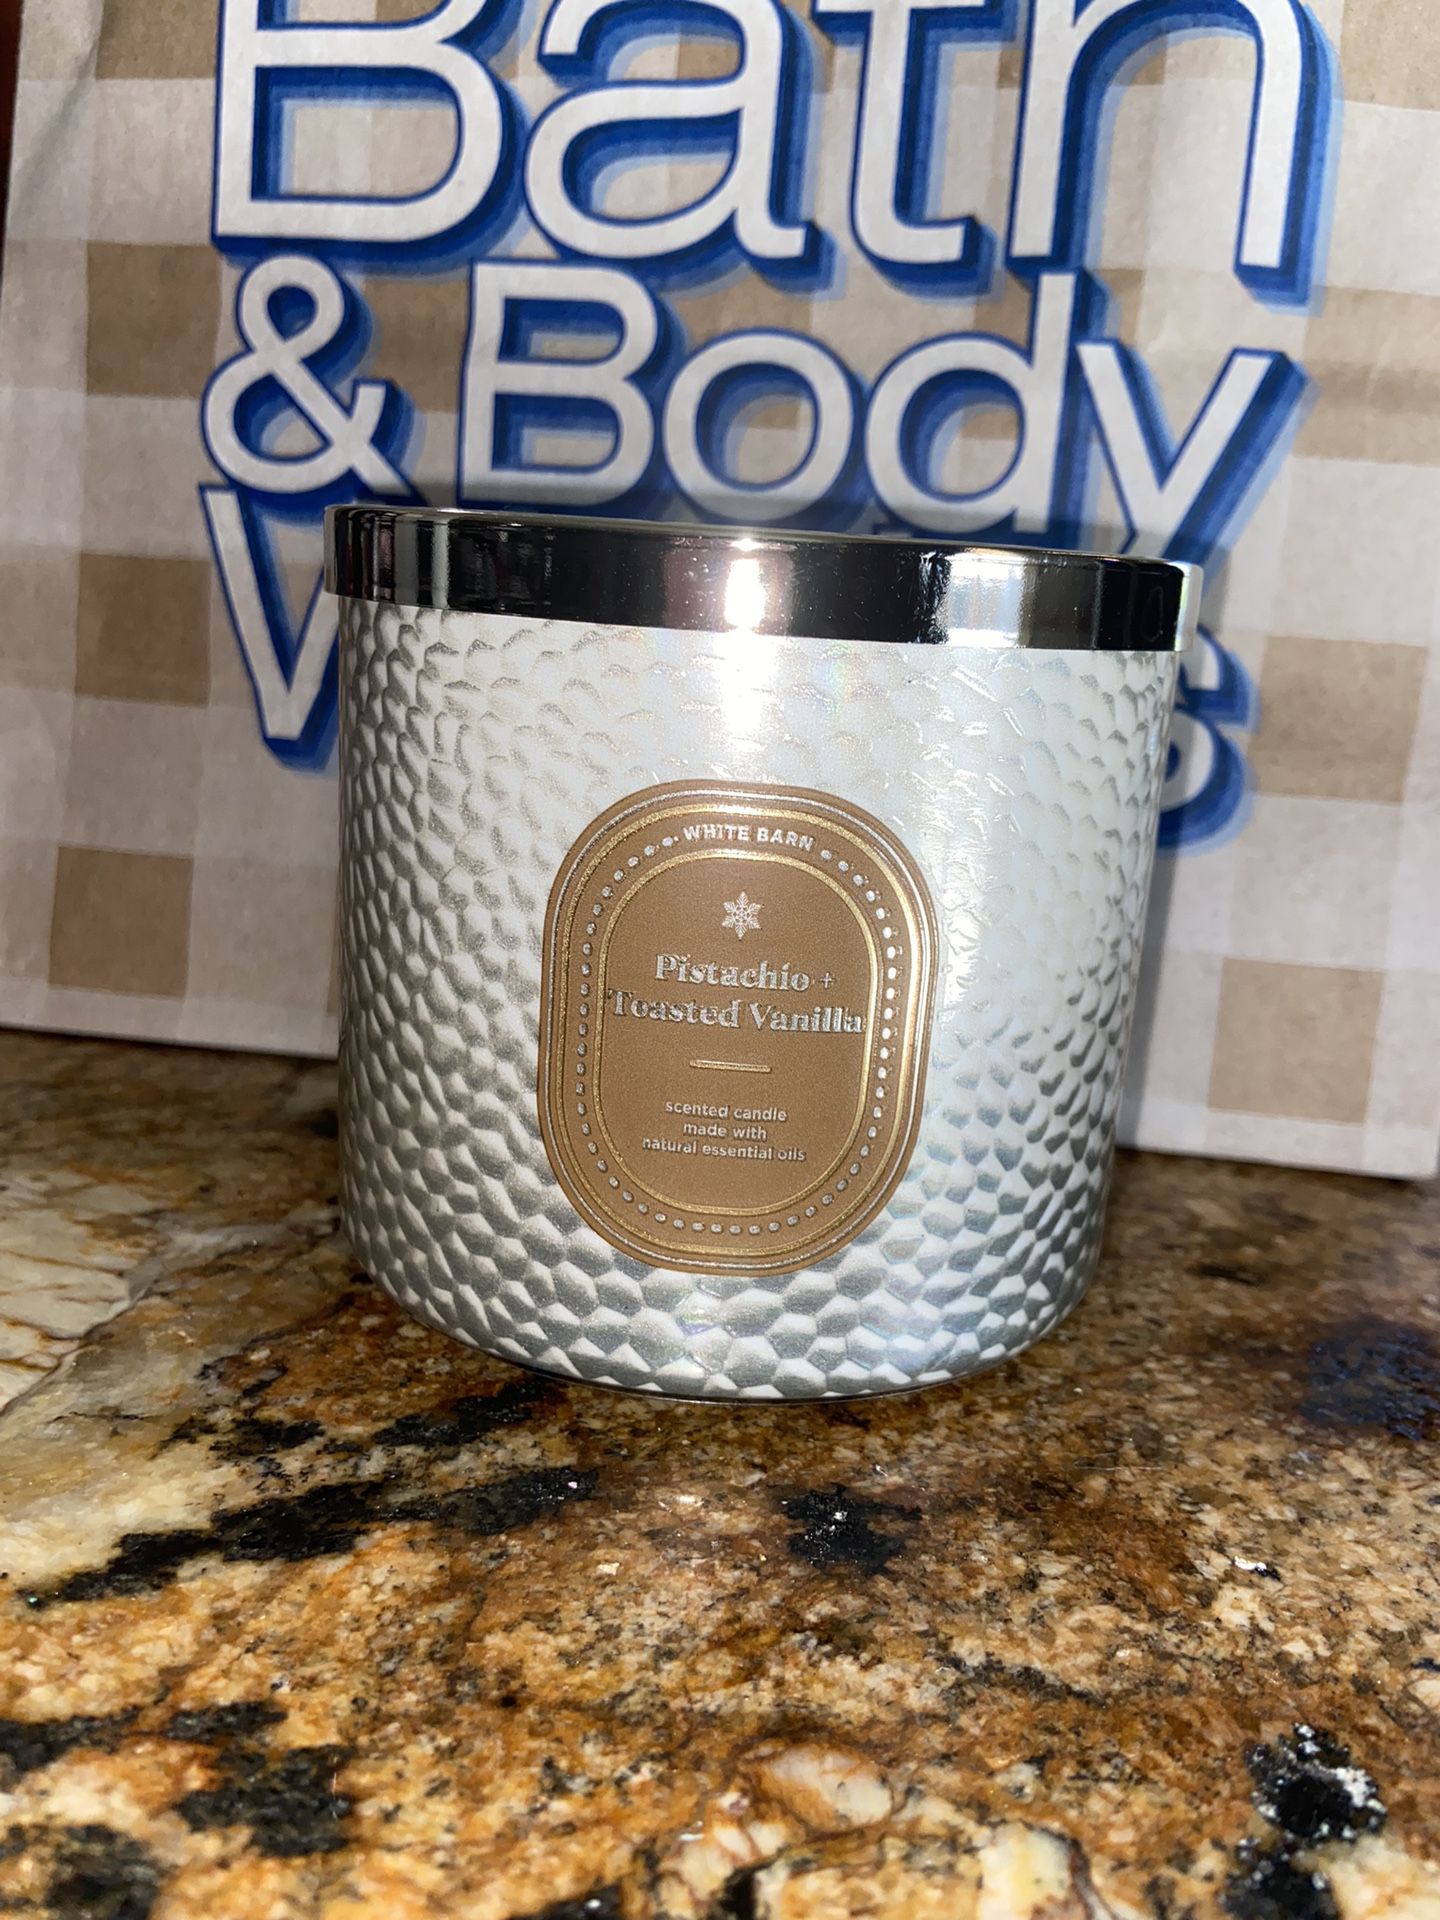 Bath & Body Works Pistachio Toasted Vanilla 3 Wick Candle 